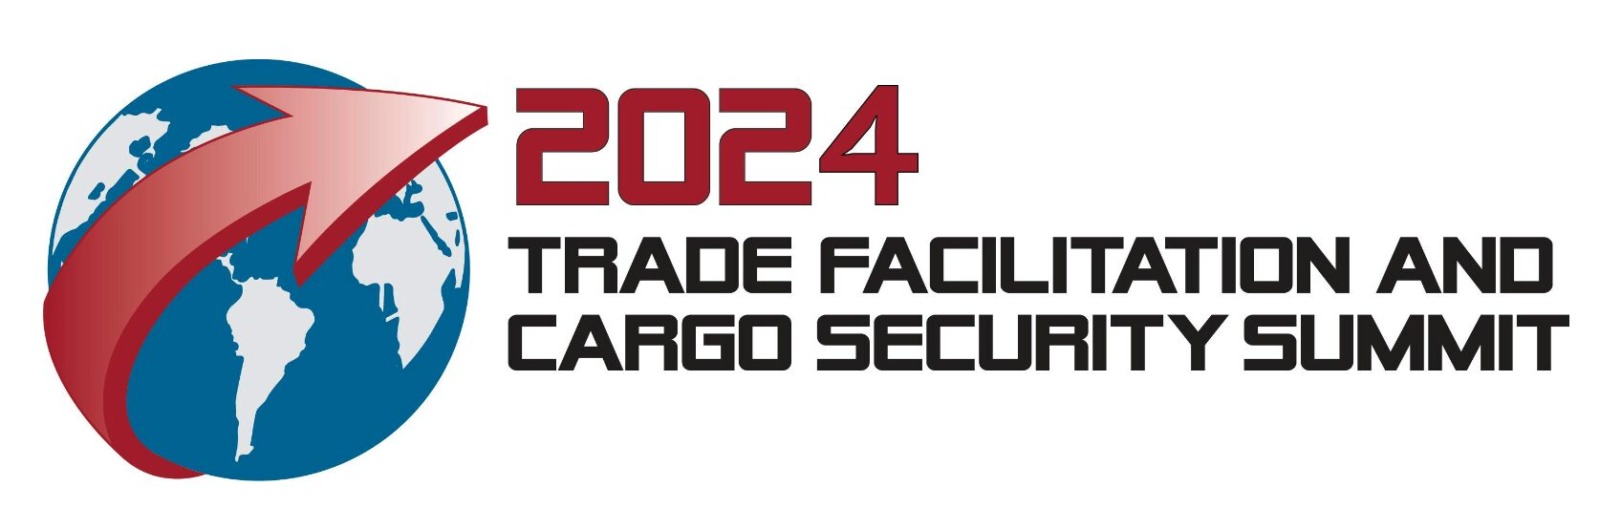 2024 Trade Facilitation and Cargo Security Summit Green Worldwide